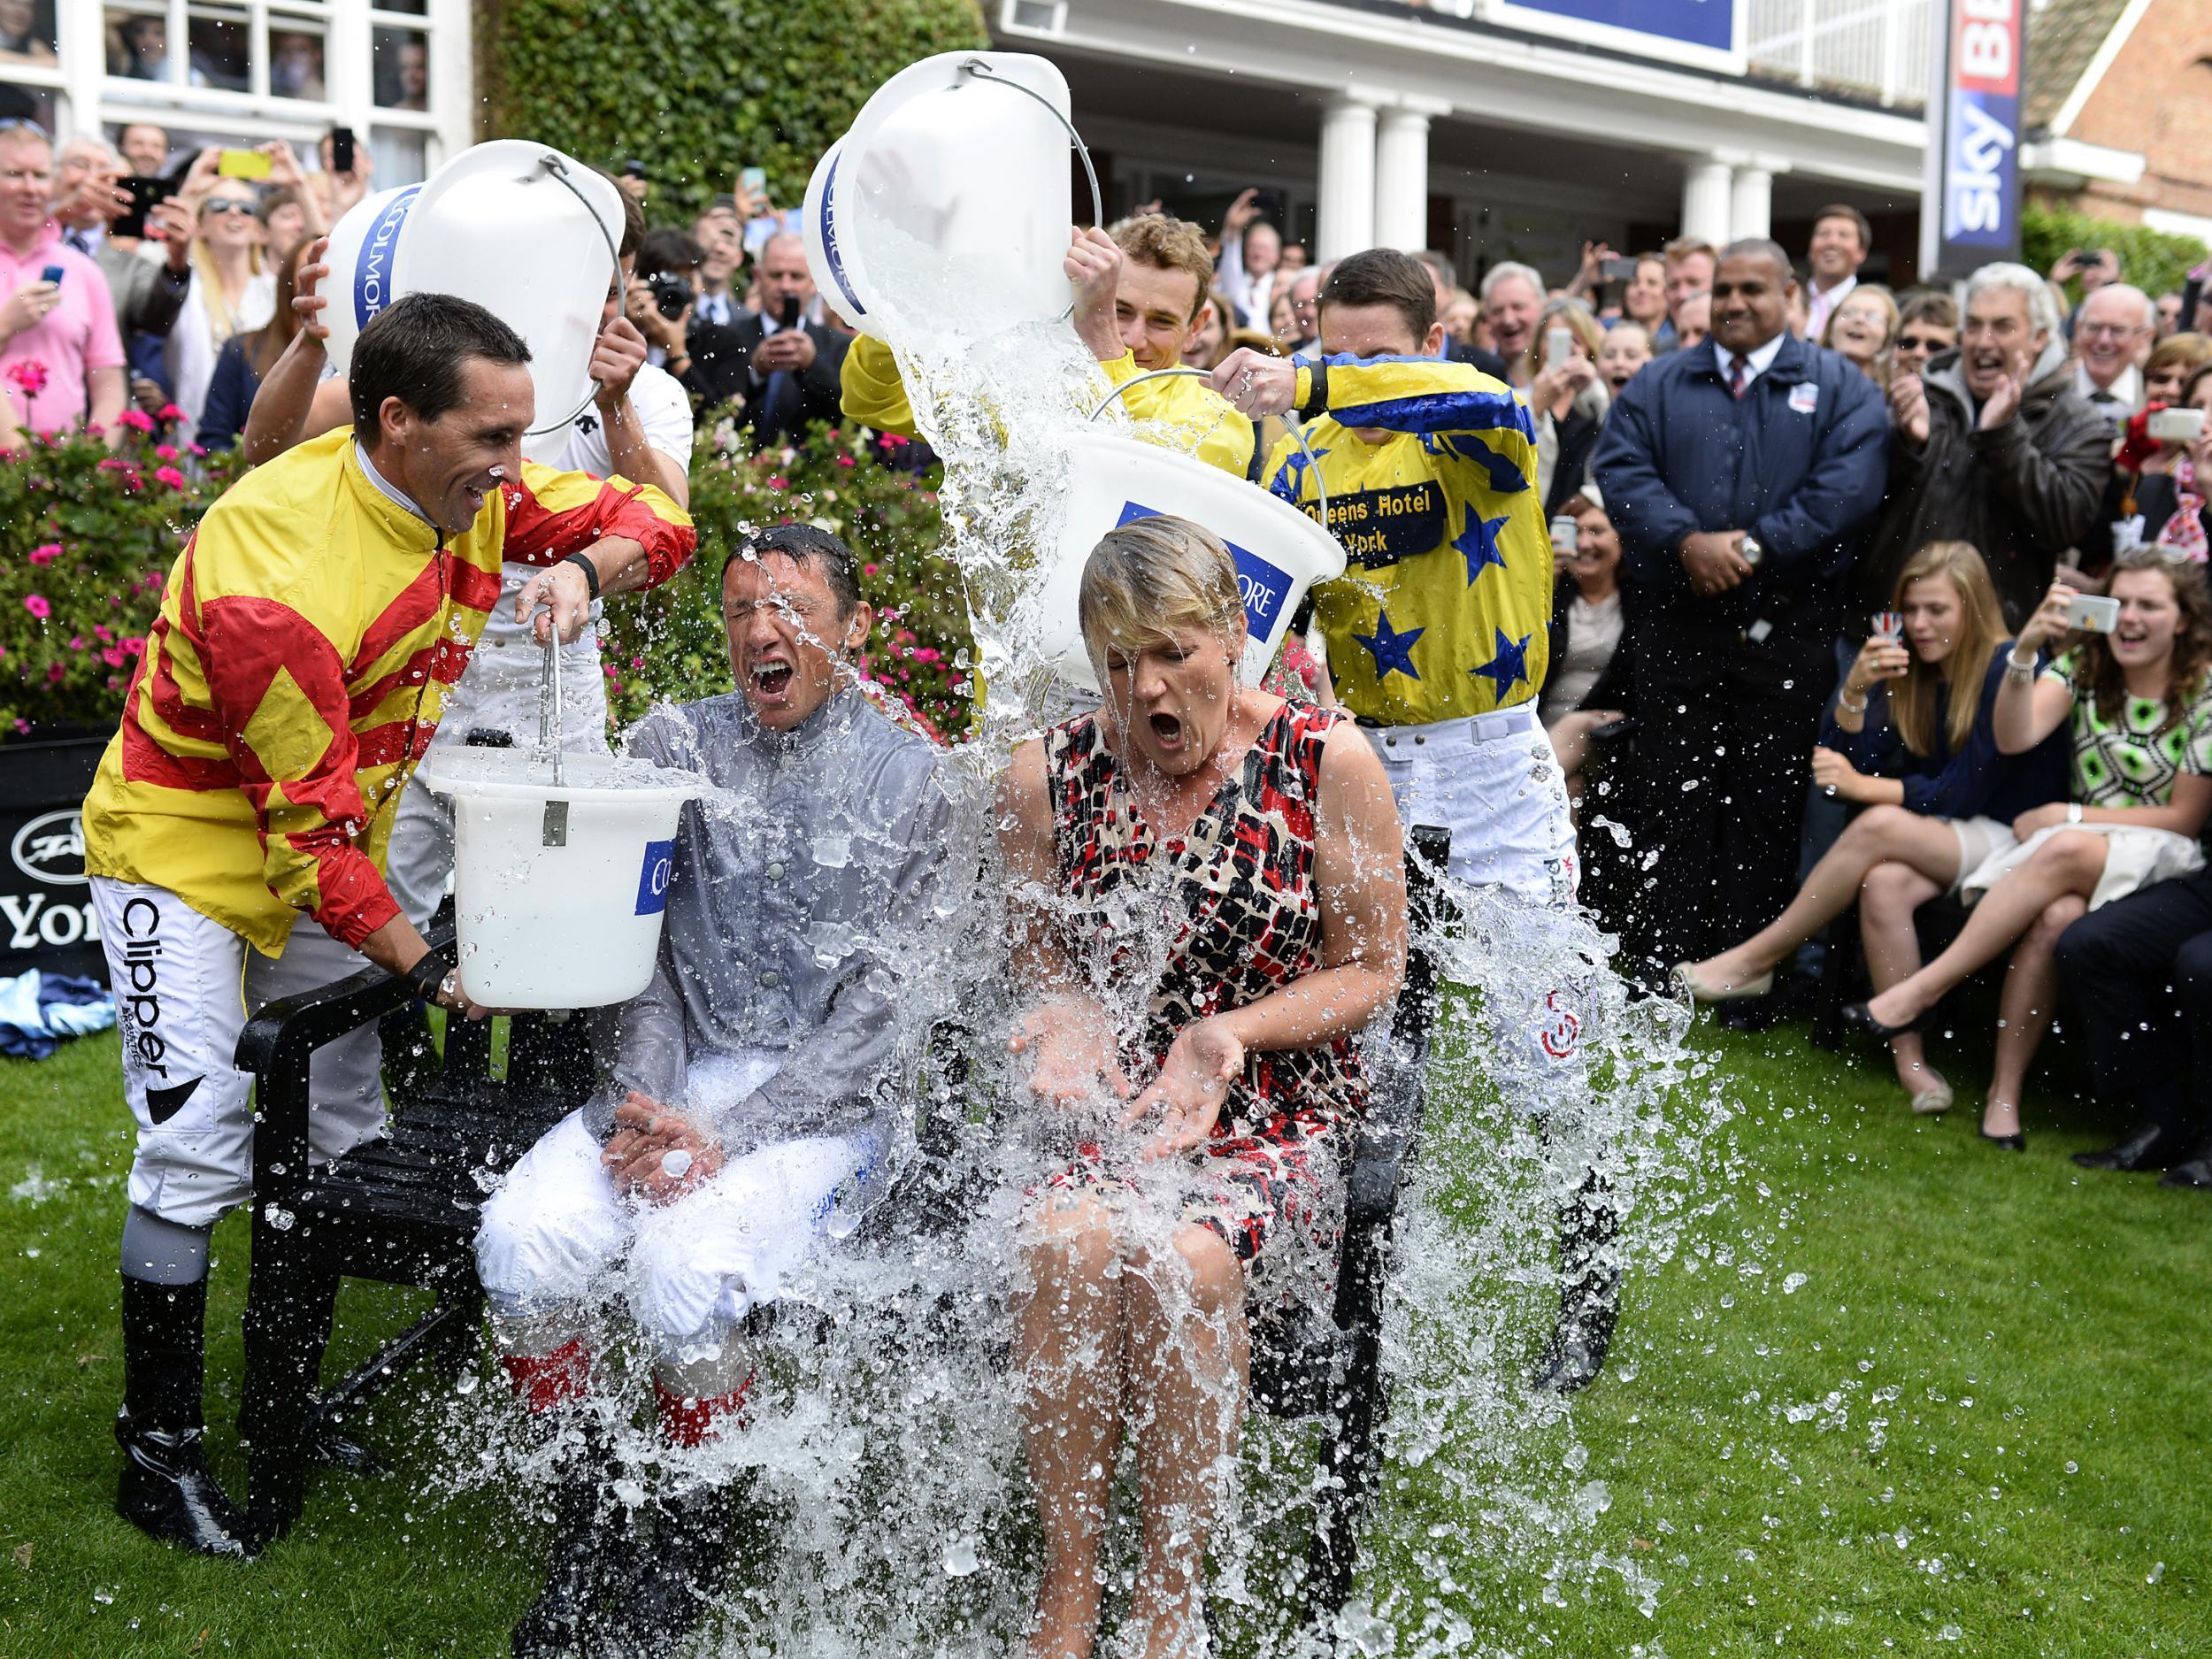 Frankie Dettori and Clare Balding take part in the ‘Ice Bucket Challenge’ at York racecourse on August 22, 2014.